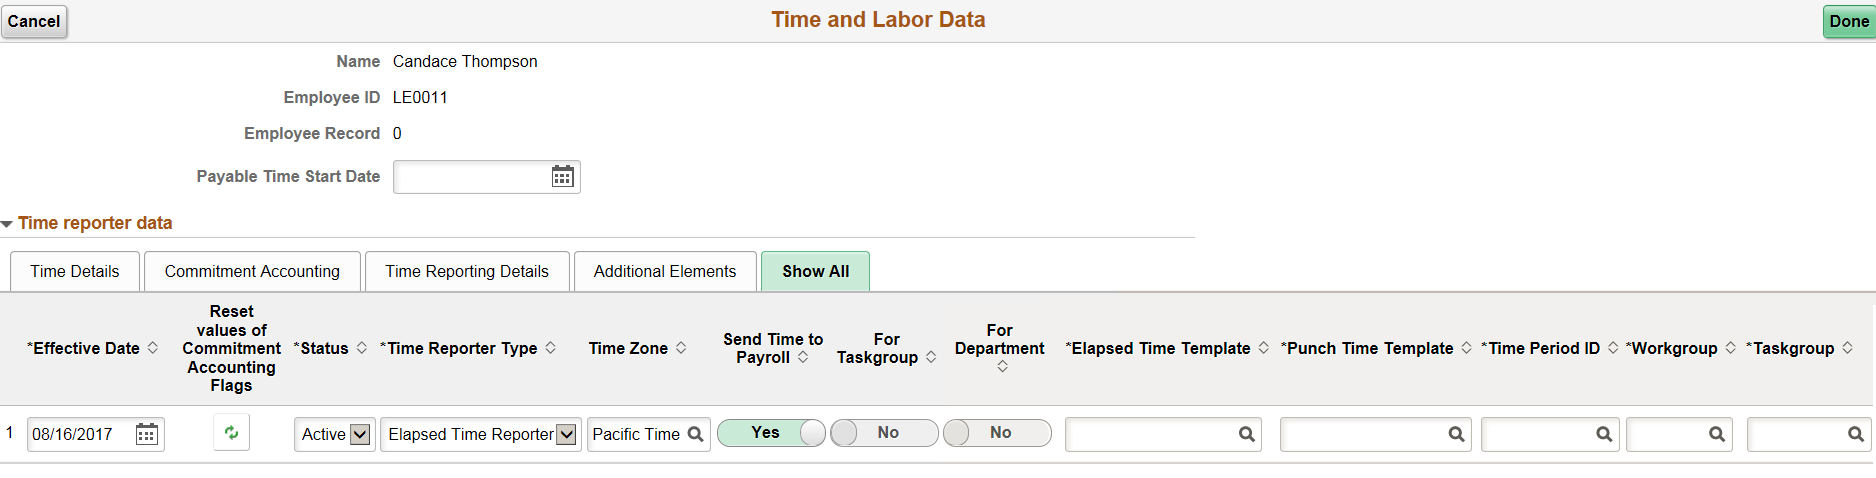 Time and Labor Data page (1 of 2)